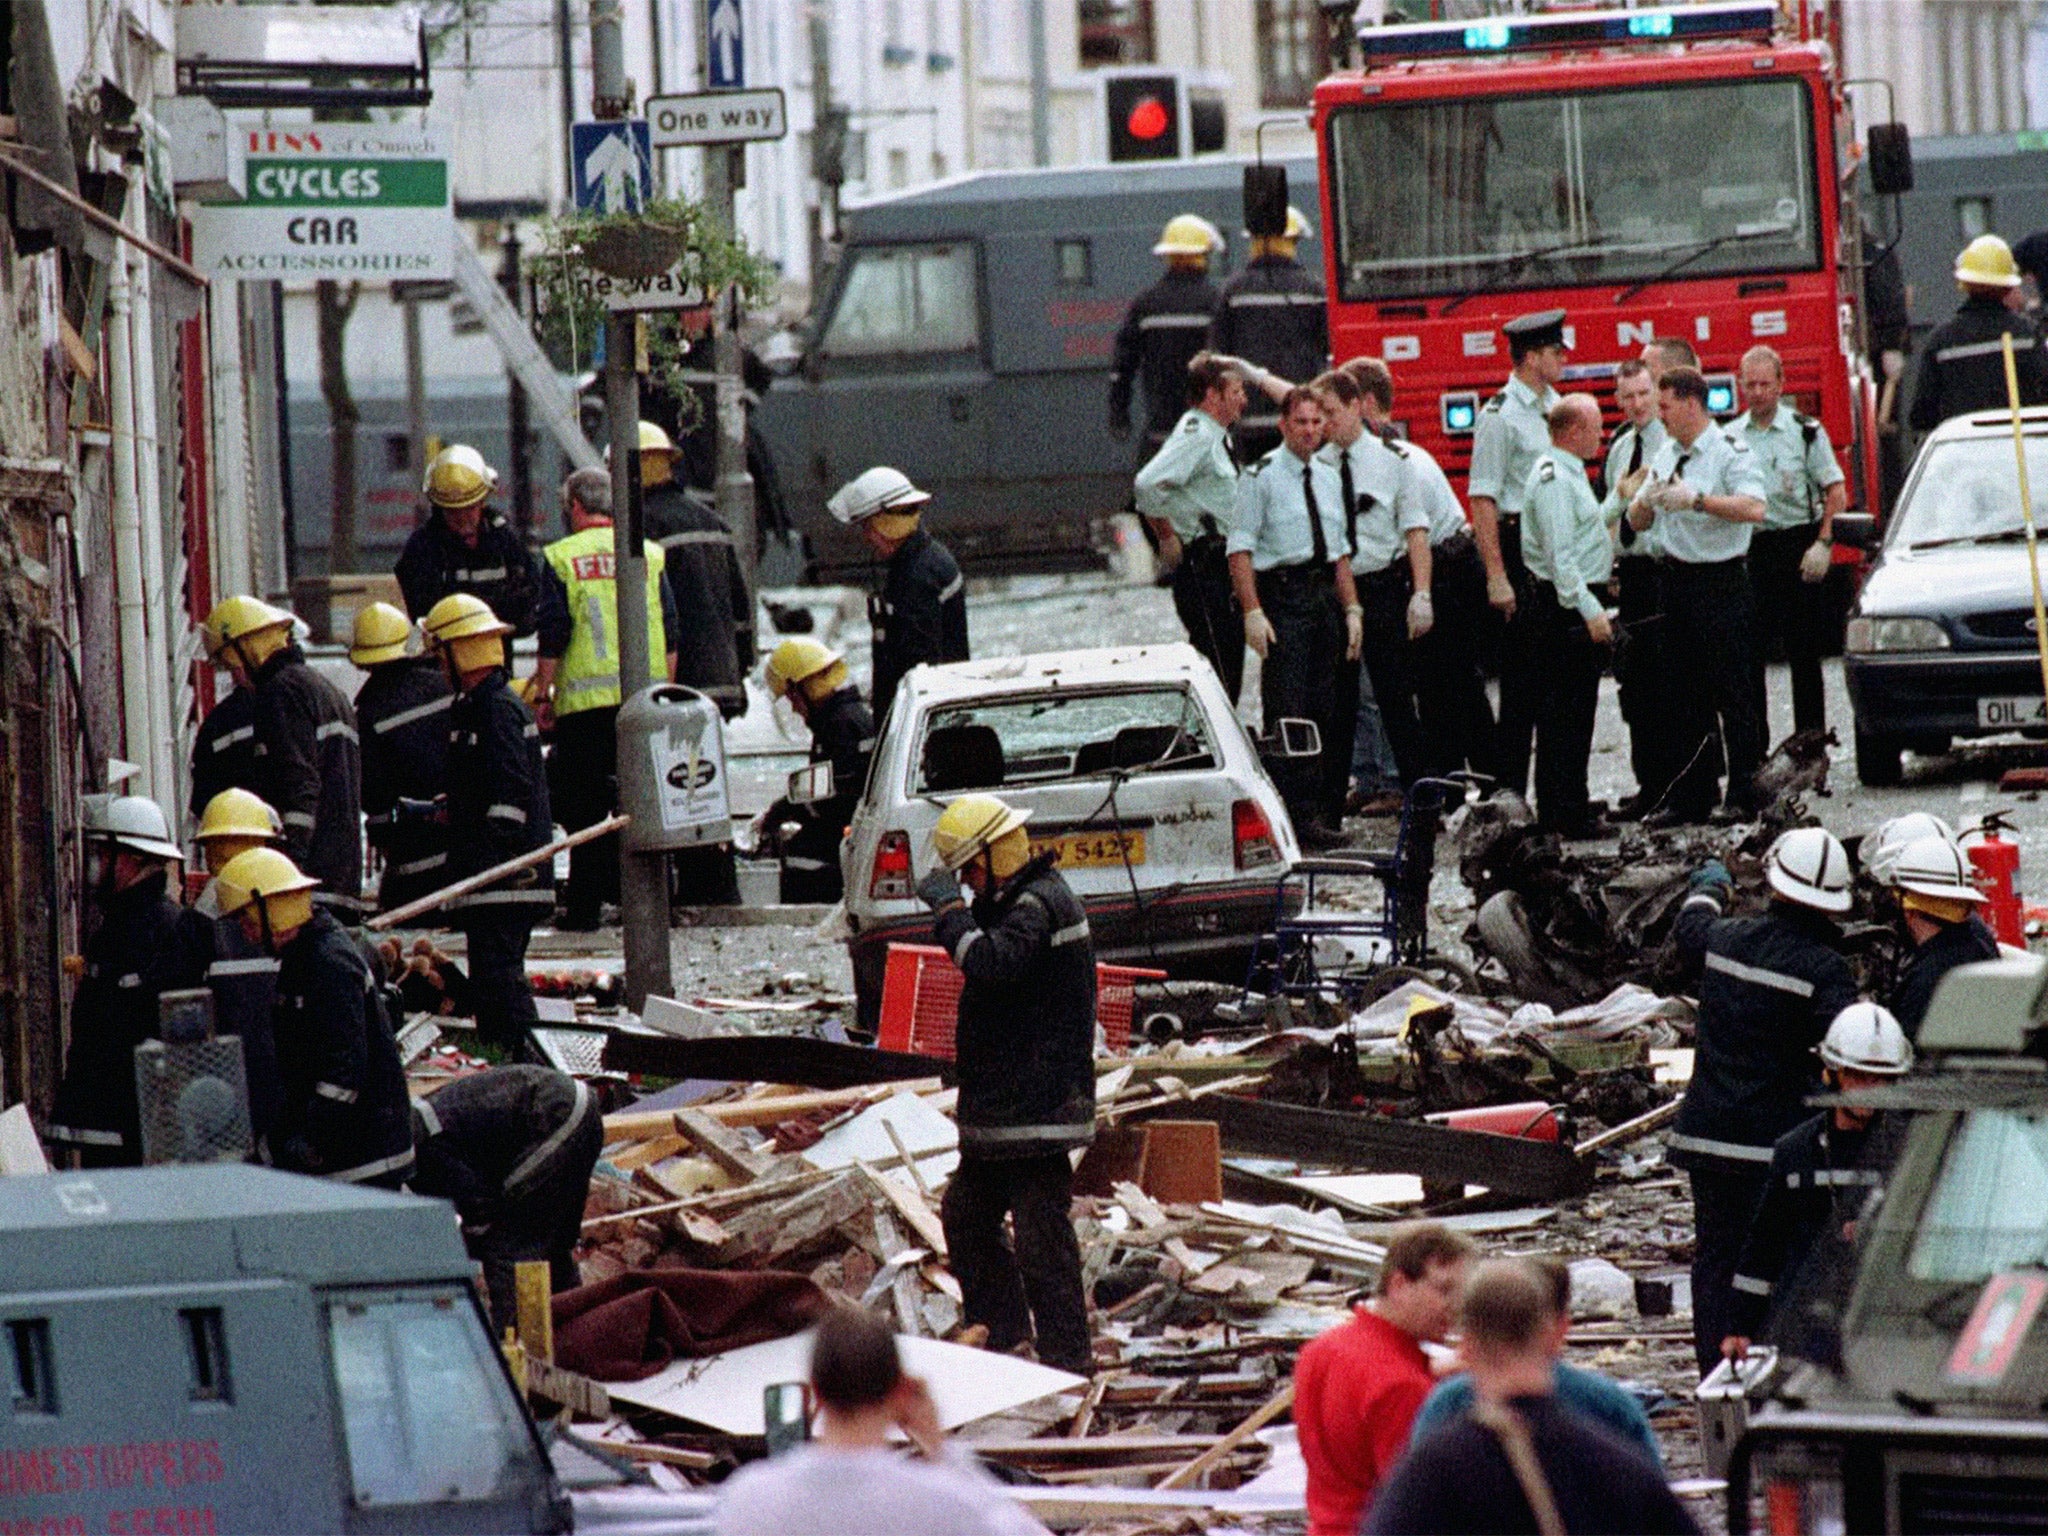 Seamus Daly is accused of killing 29 people in the 1998 Omagh bombing